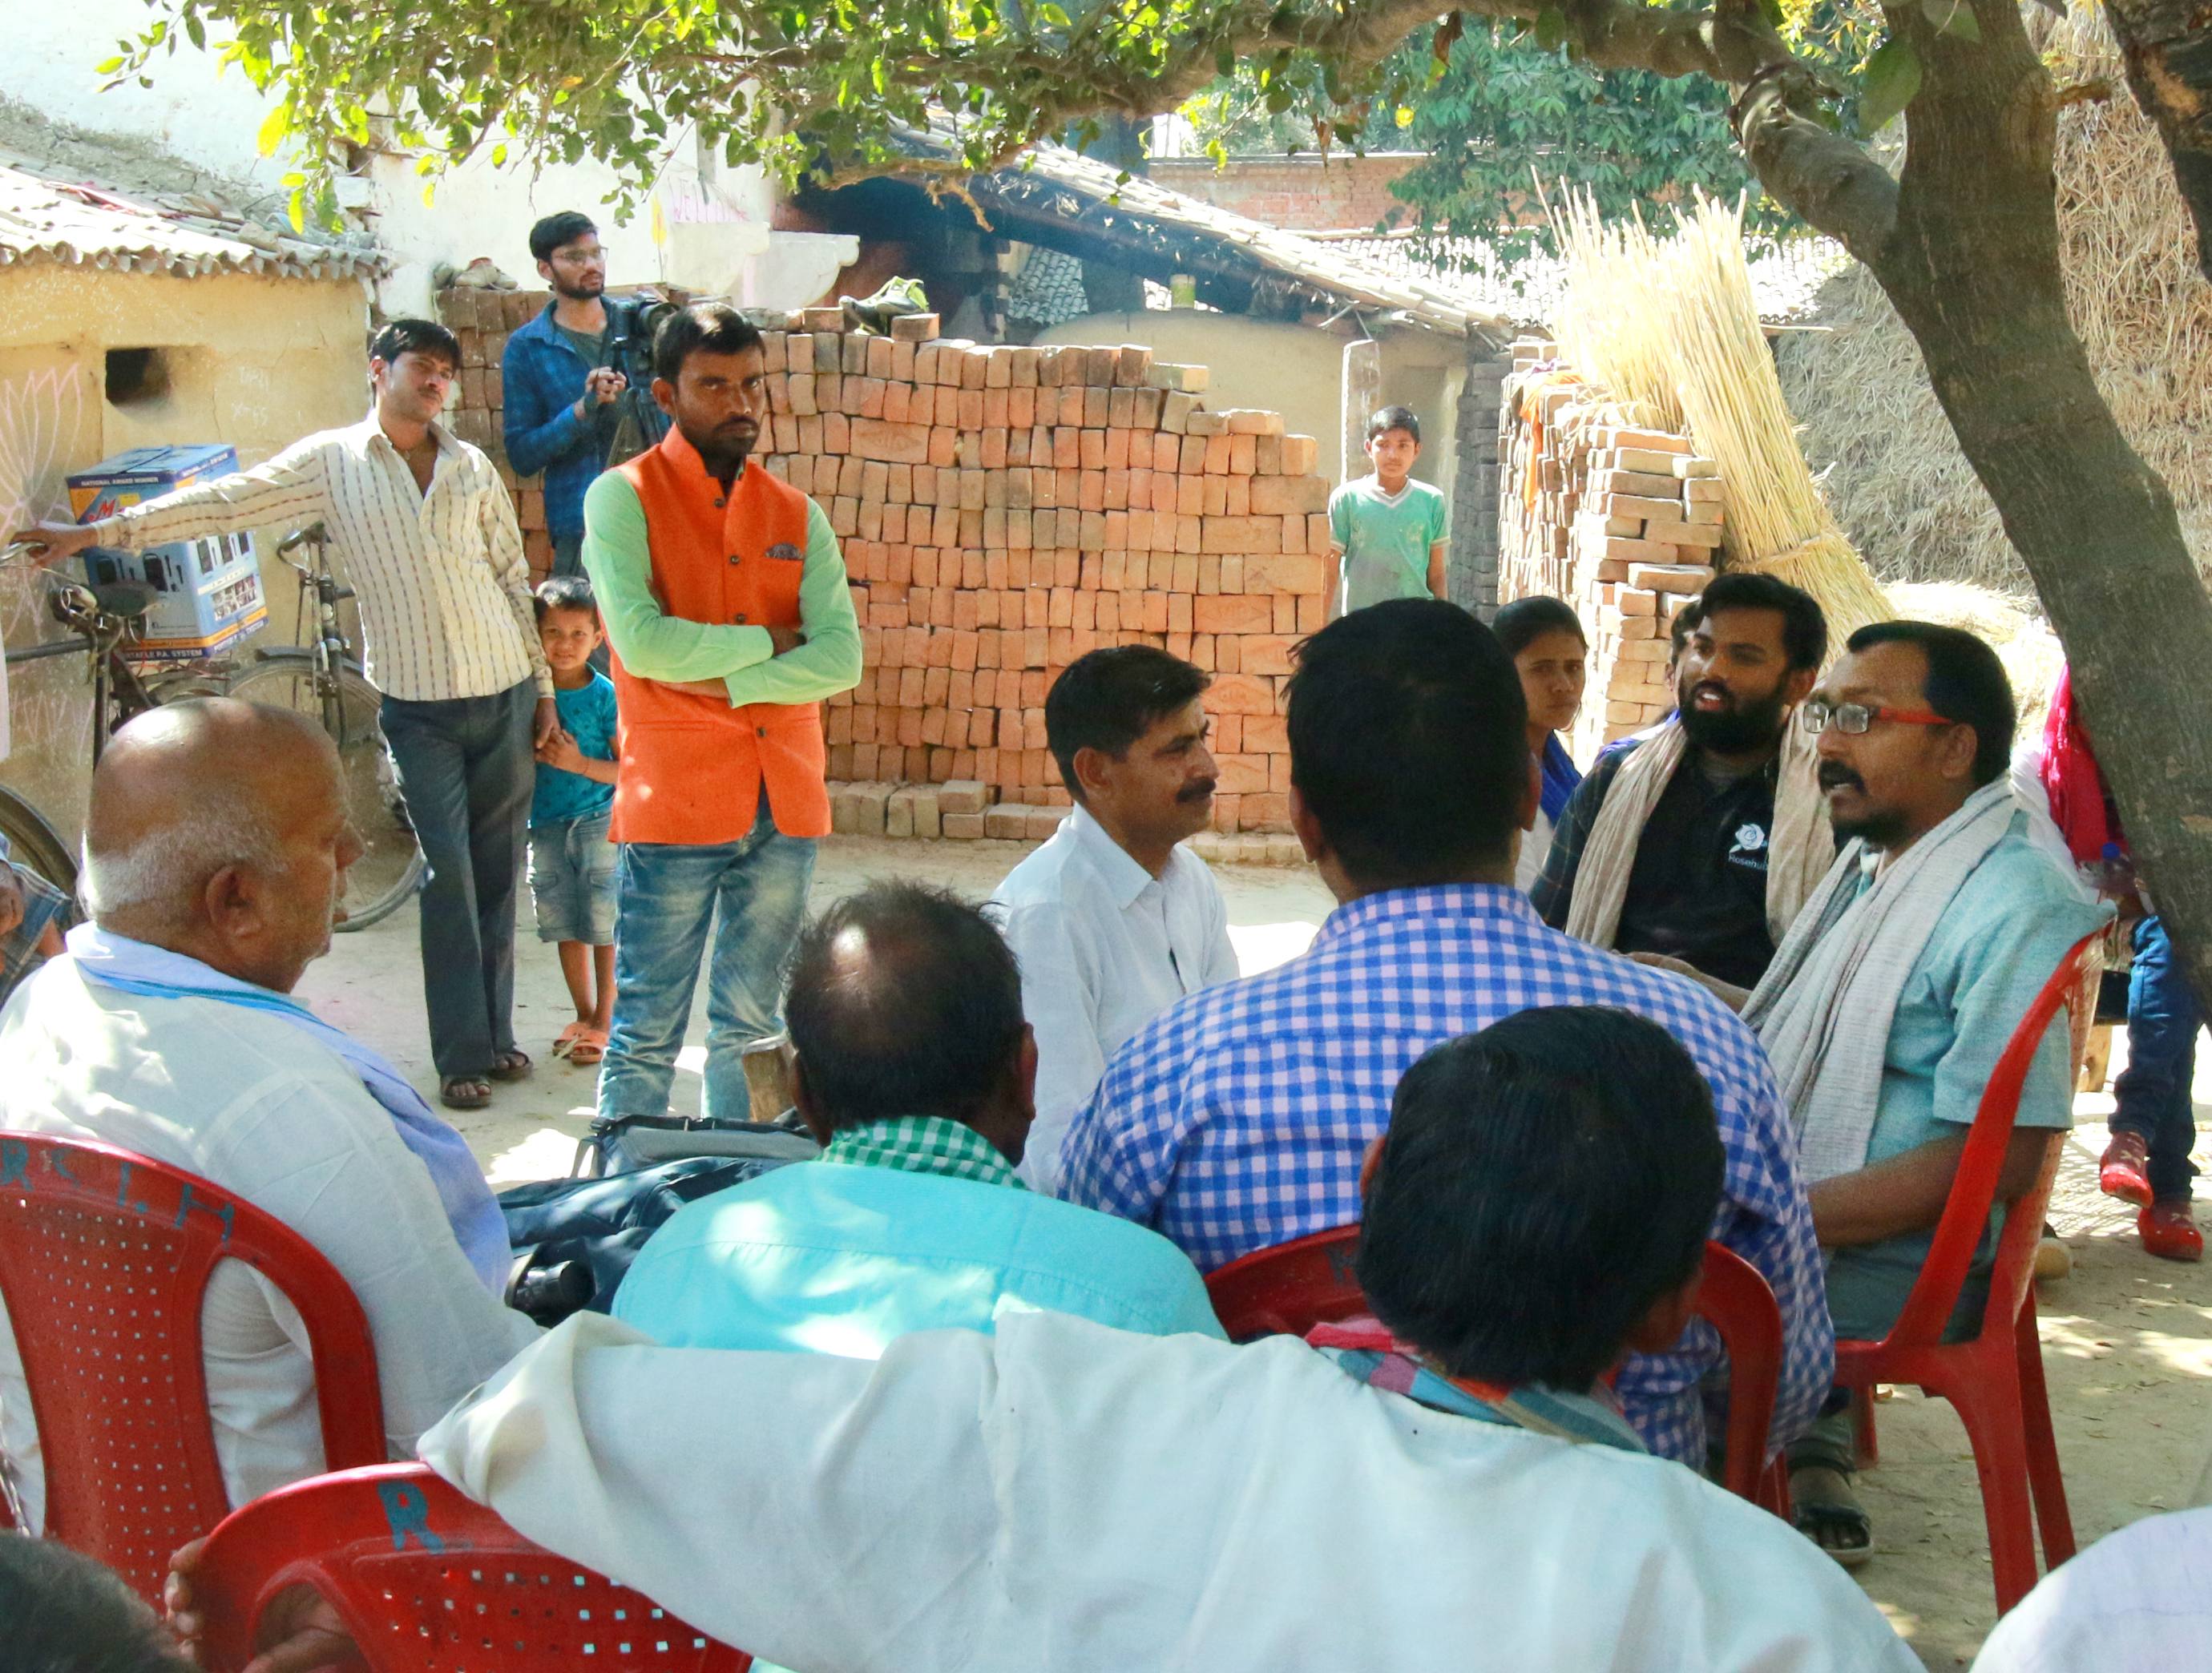 Discussion with farmers during shoot